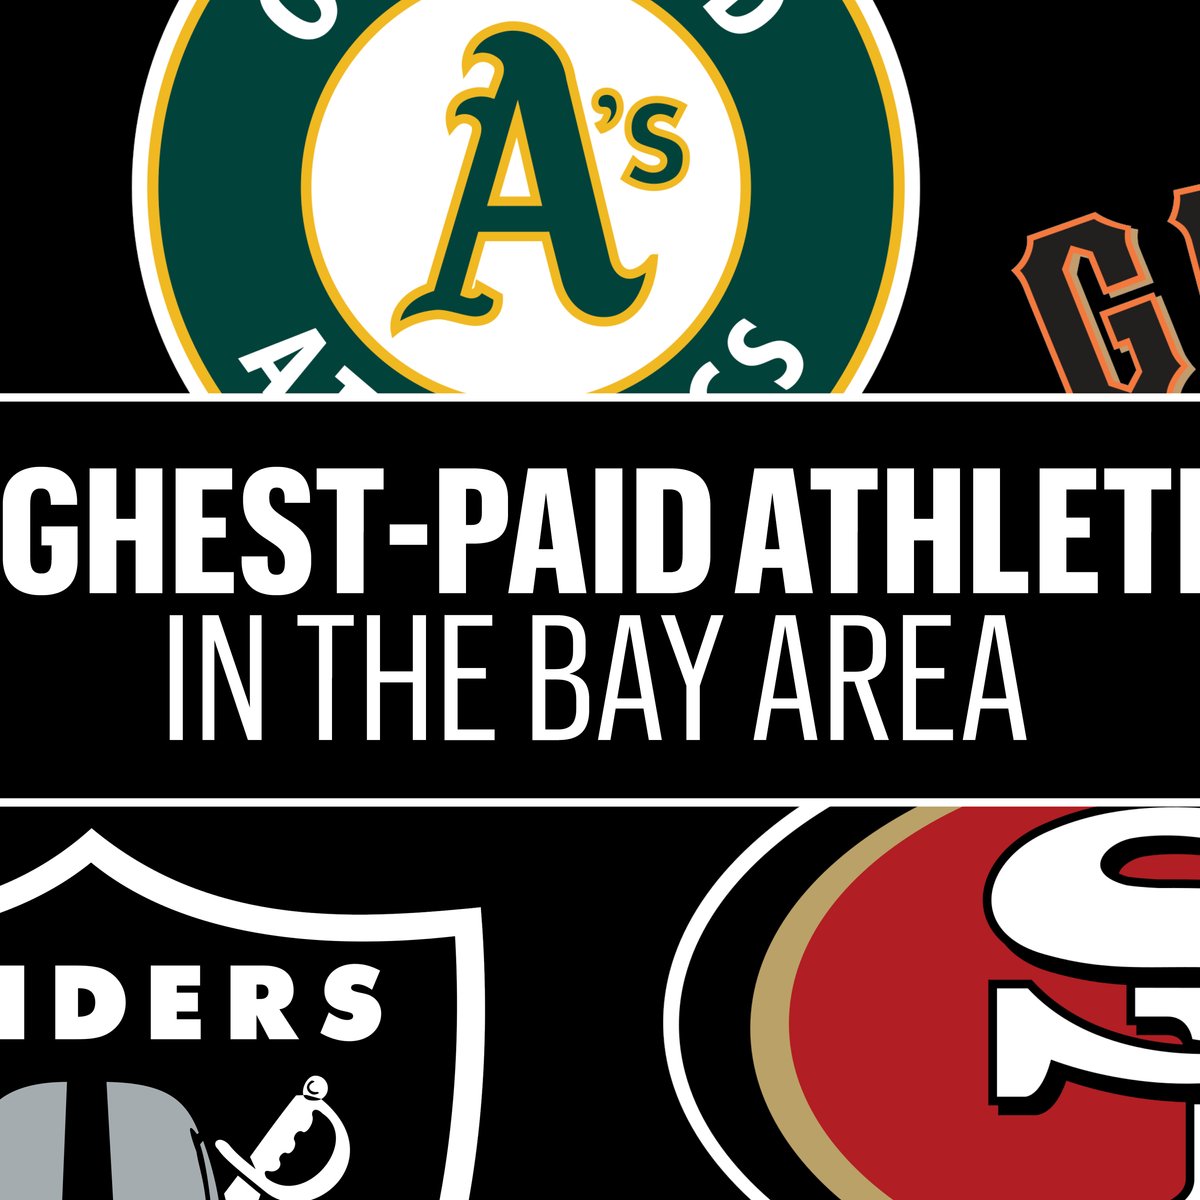 Meet the highest-paid athletes in the Bay Area featuring the